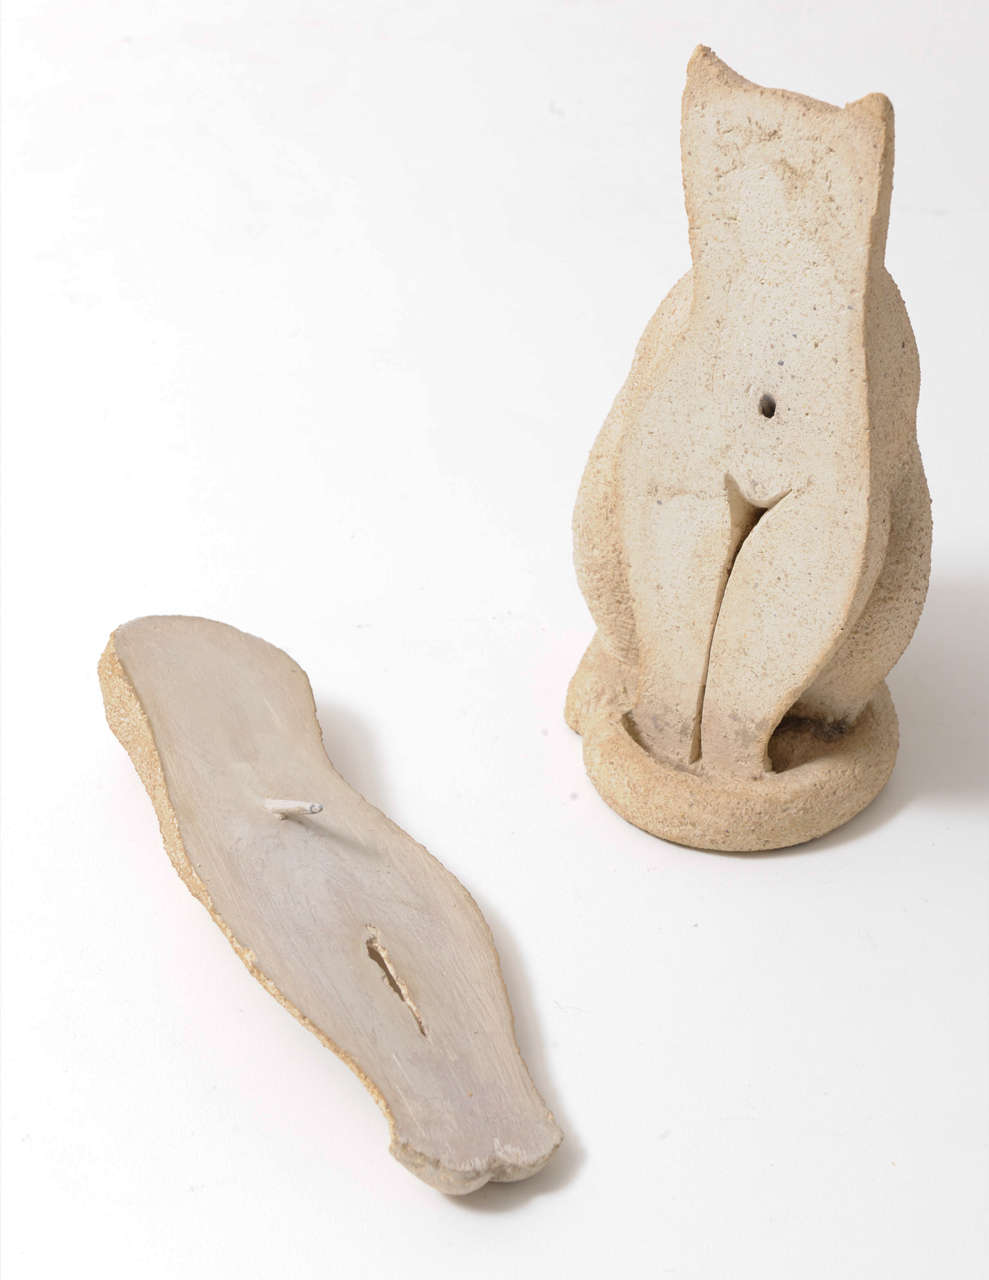 A raw ceramic specially designed cat, consisting of two parts, one can take off and shows a hidden female body, the secrets of the 1970s designed by Karel made in Belgium.